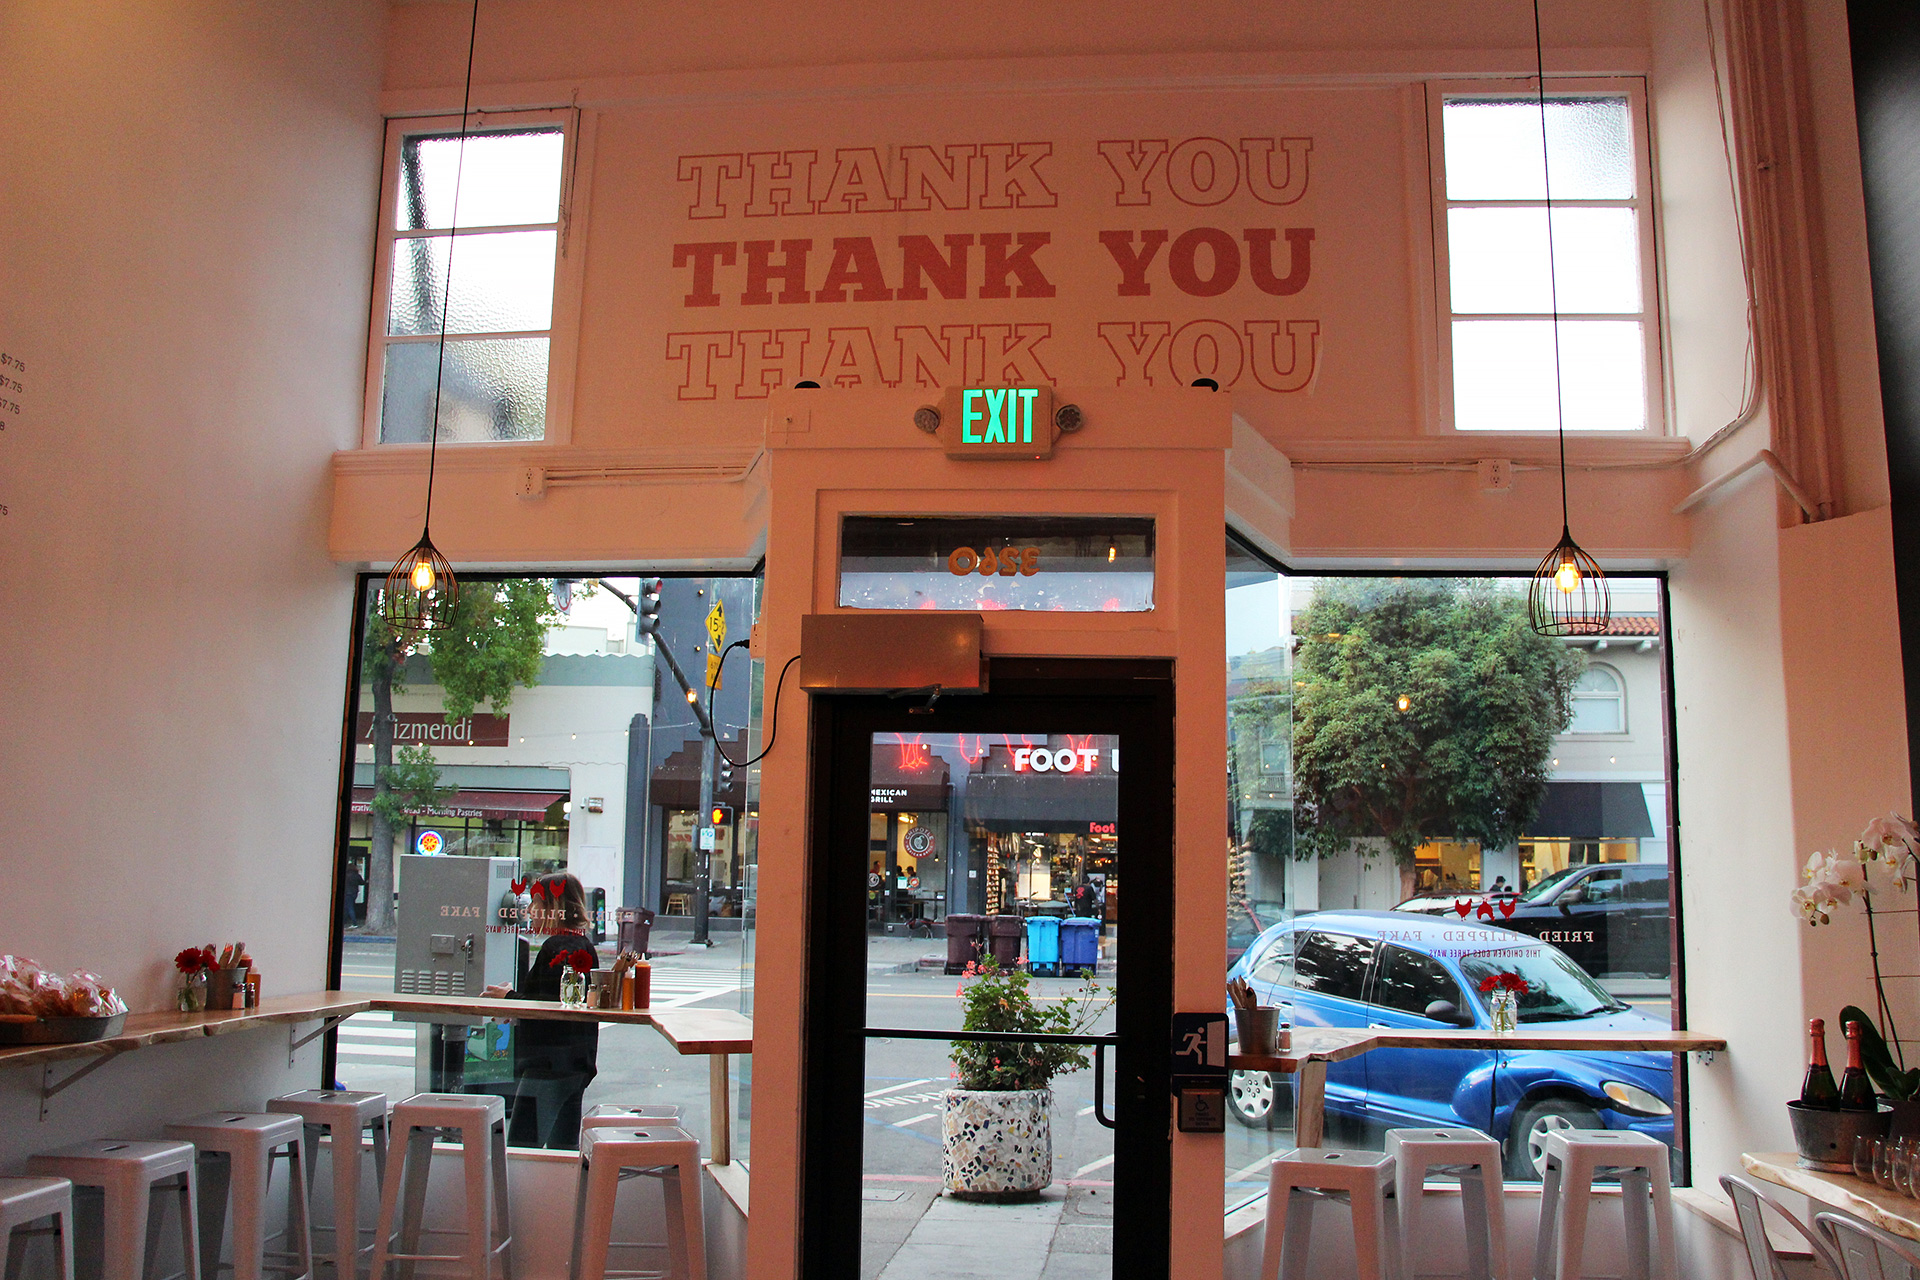 "Thank You" with view of Lakeshore Ave.